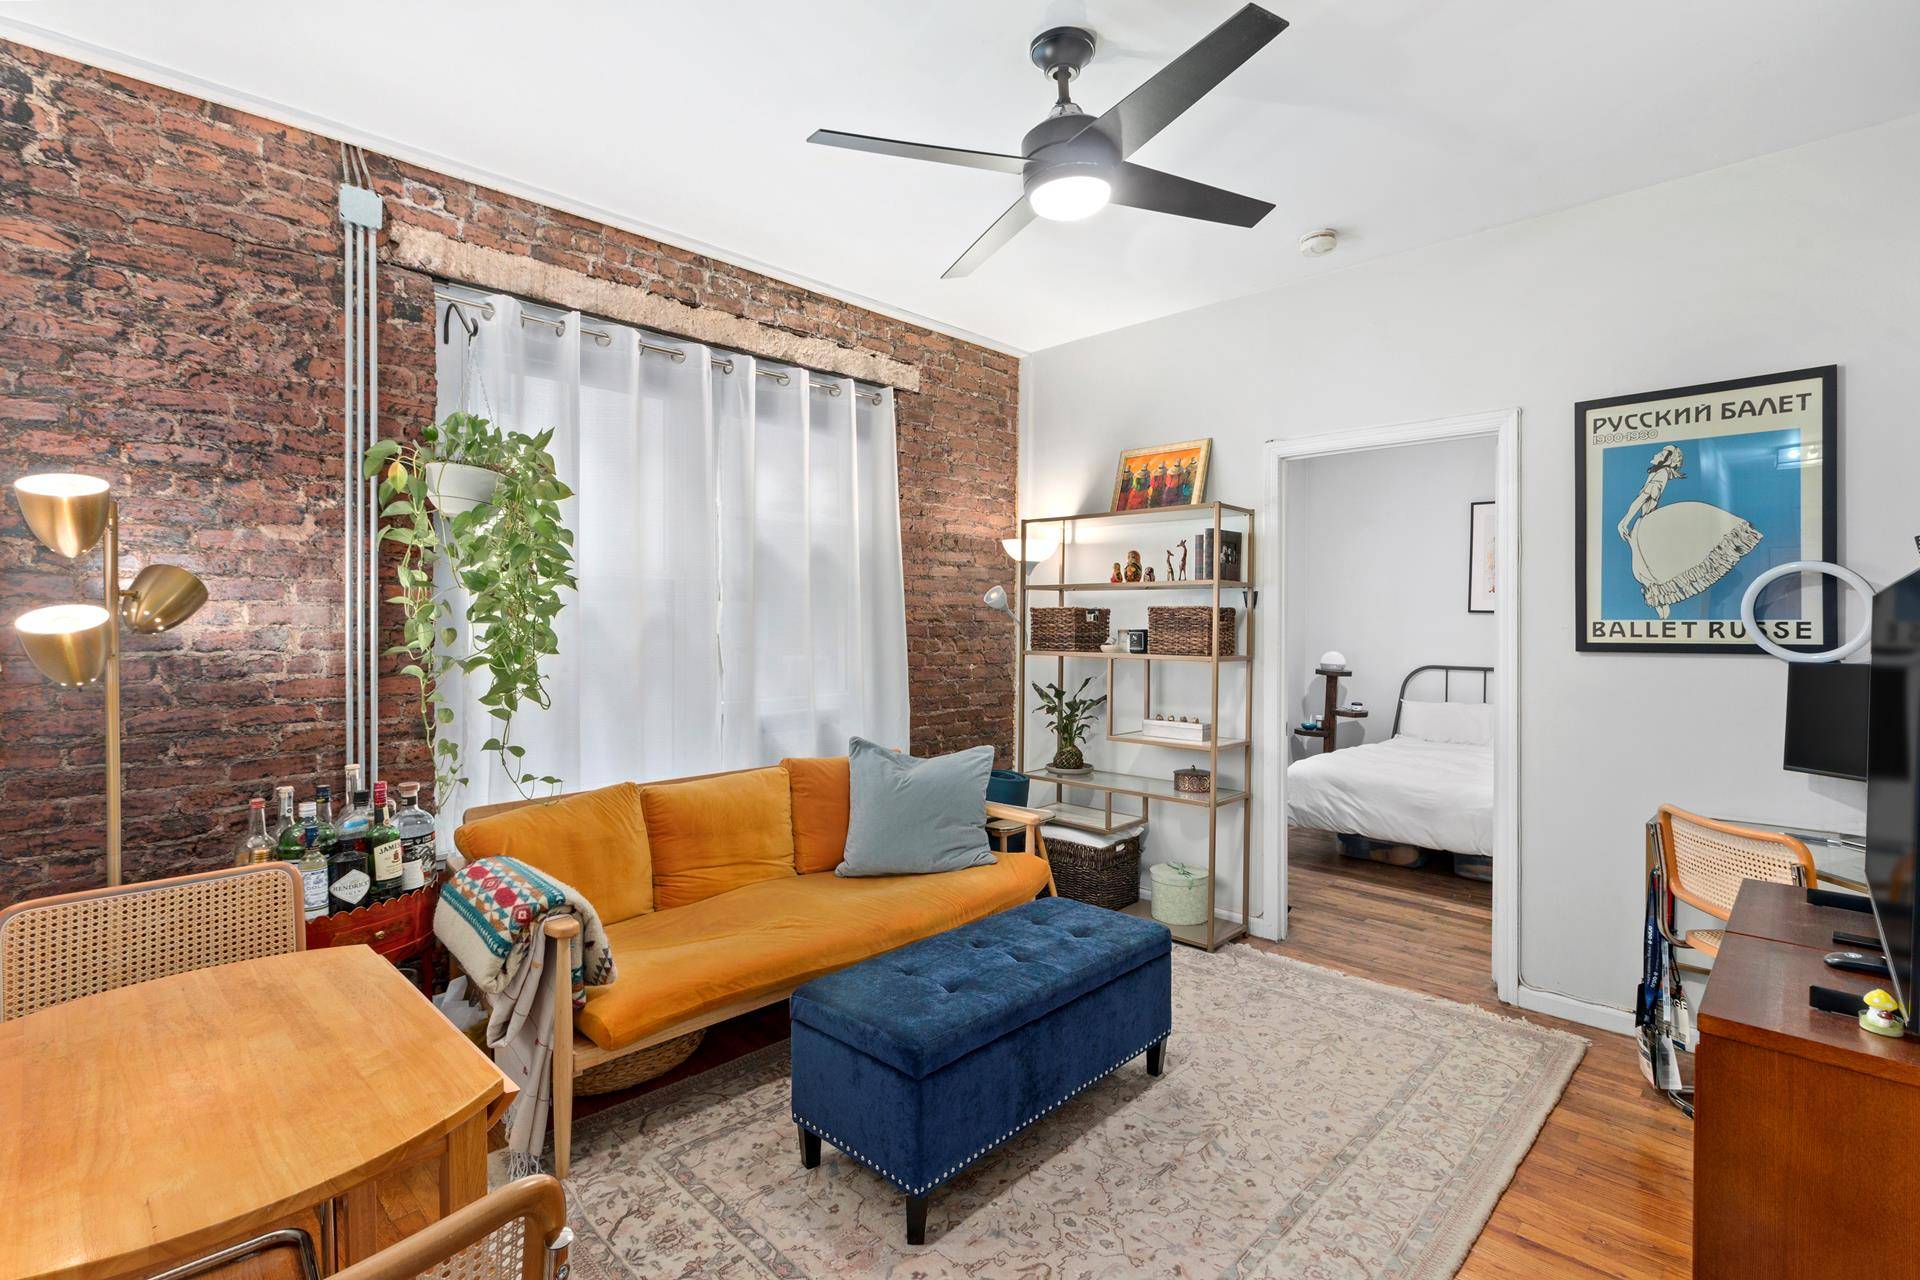 Sleek and stylish define this One Bedroom Coop in super cool Crown Heights.